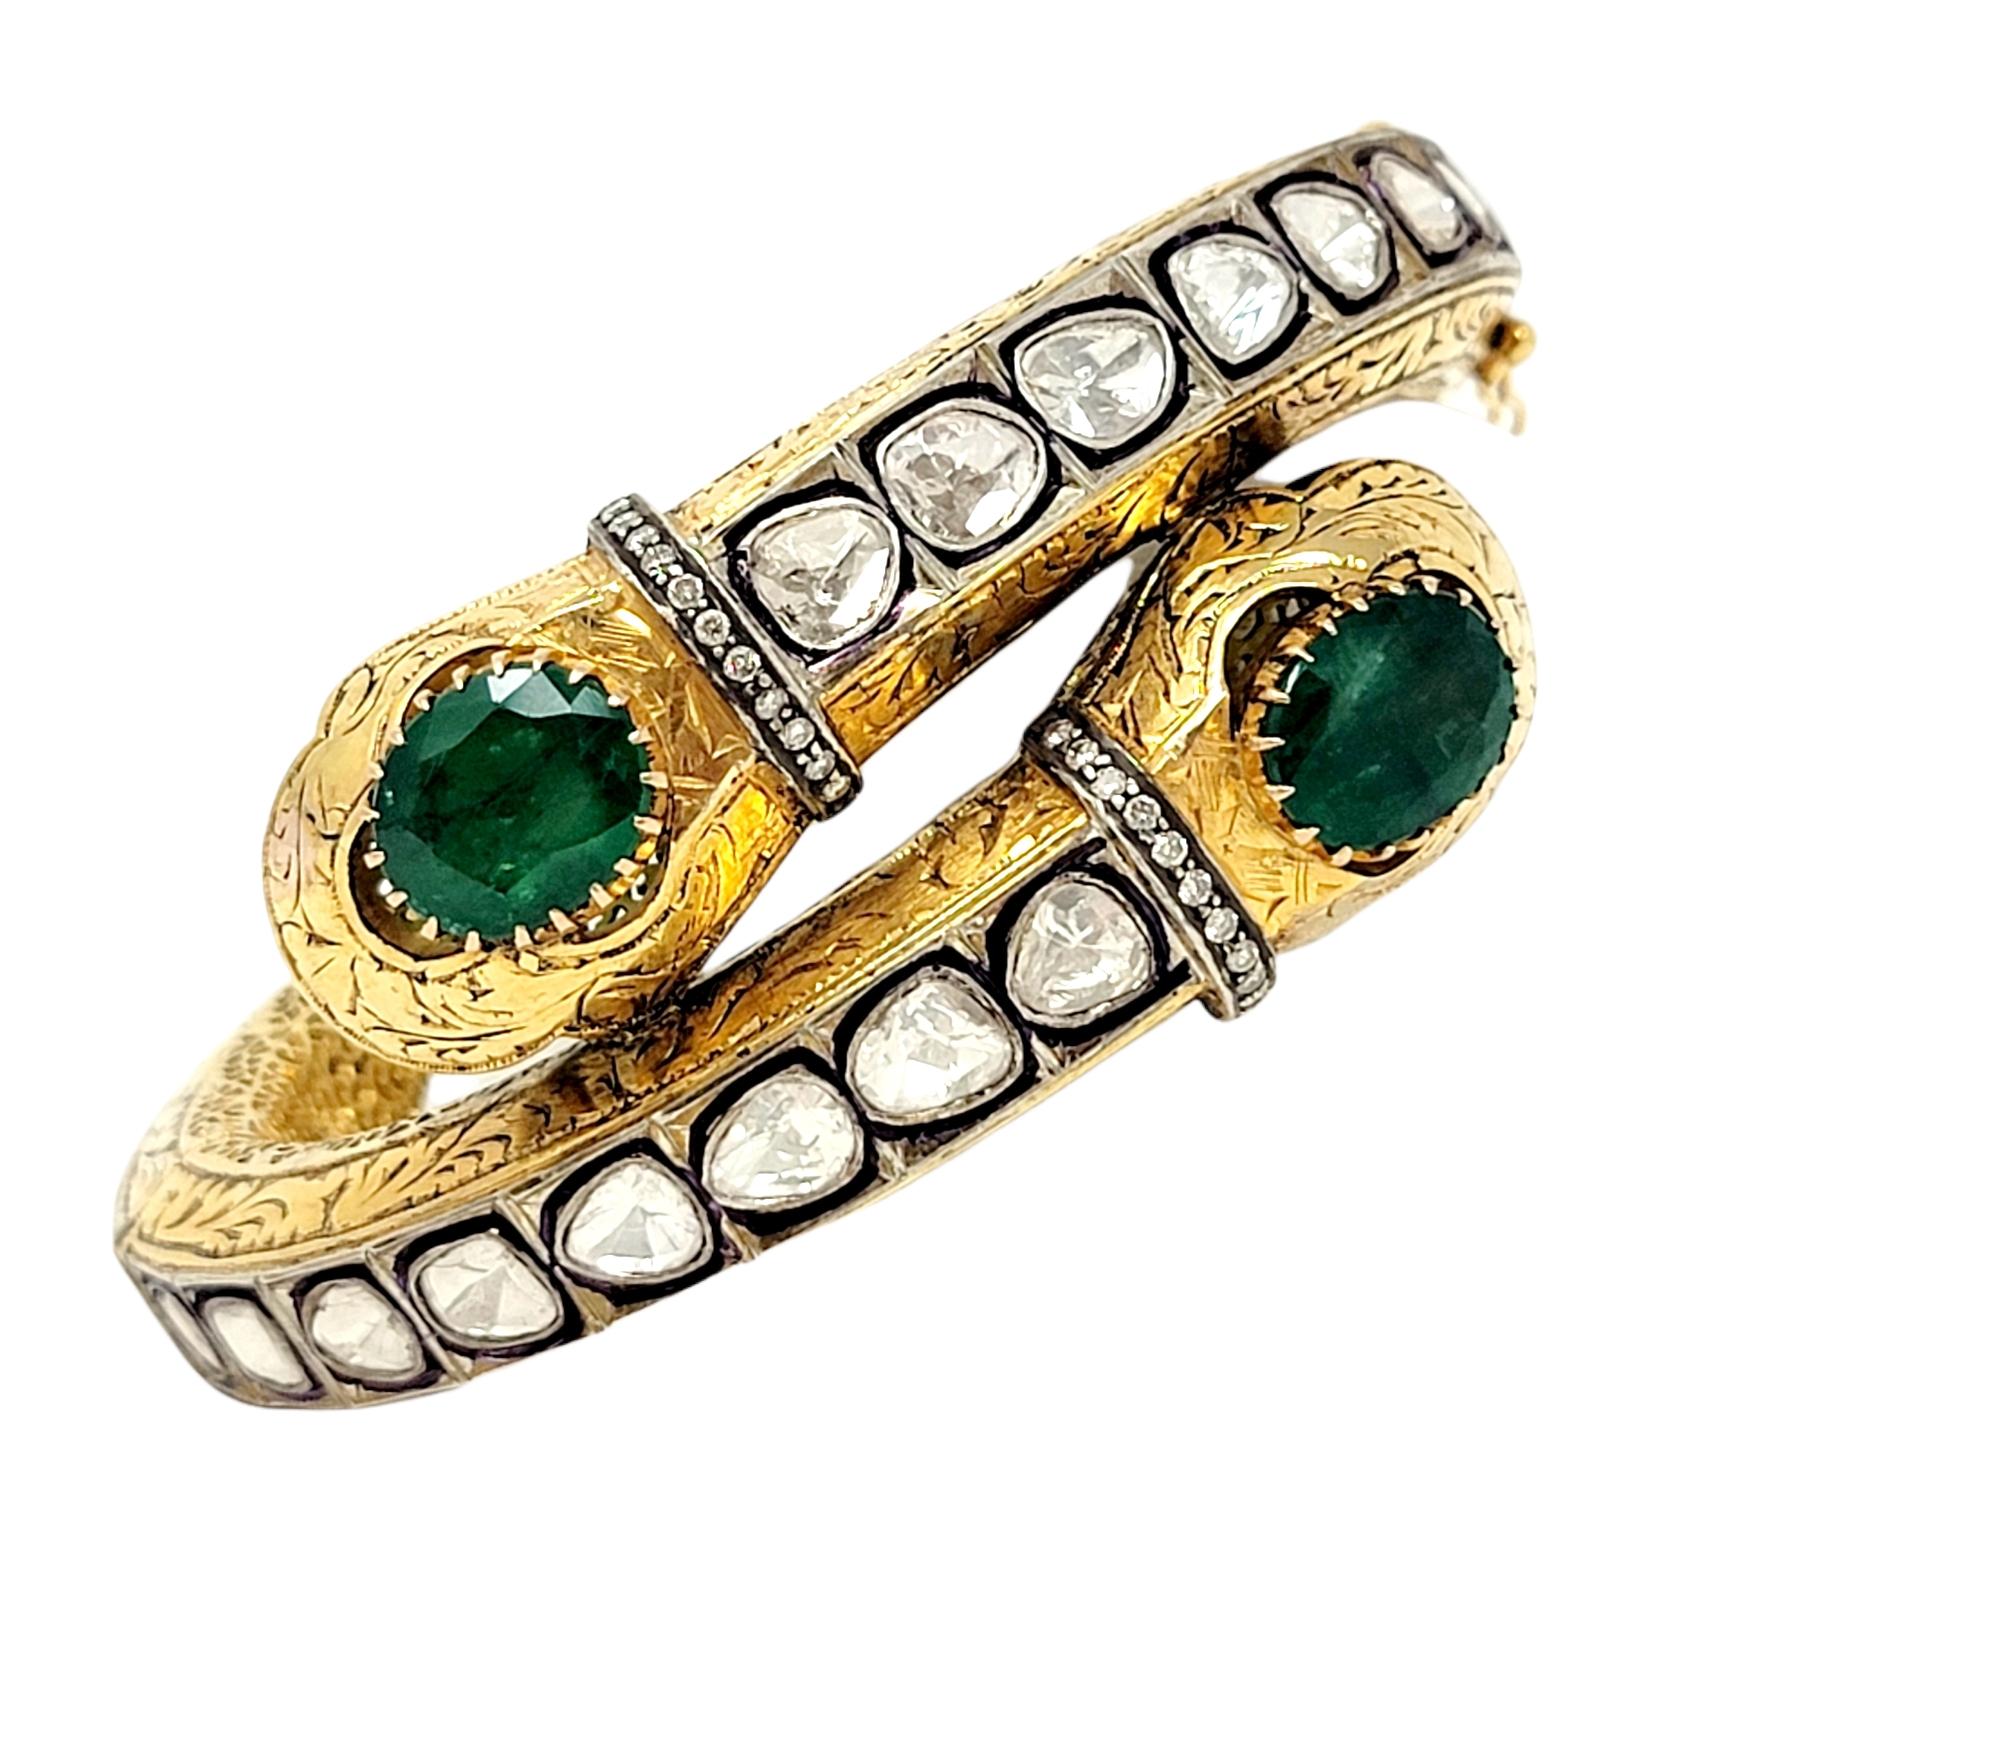 Incredible vintage Polki emerald and diamond bypass bracelet is an absolute work of art for your wrist! This stunning bangle features a 14 karat yellow gold and sterling bodice embellished with rounded rough cut diamonds and large green emeralds